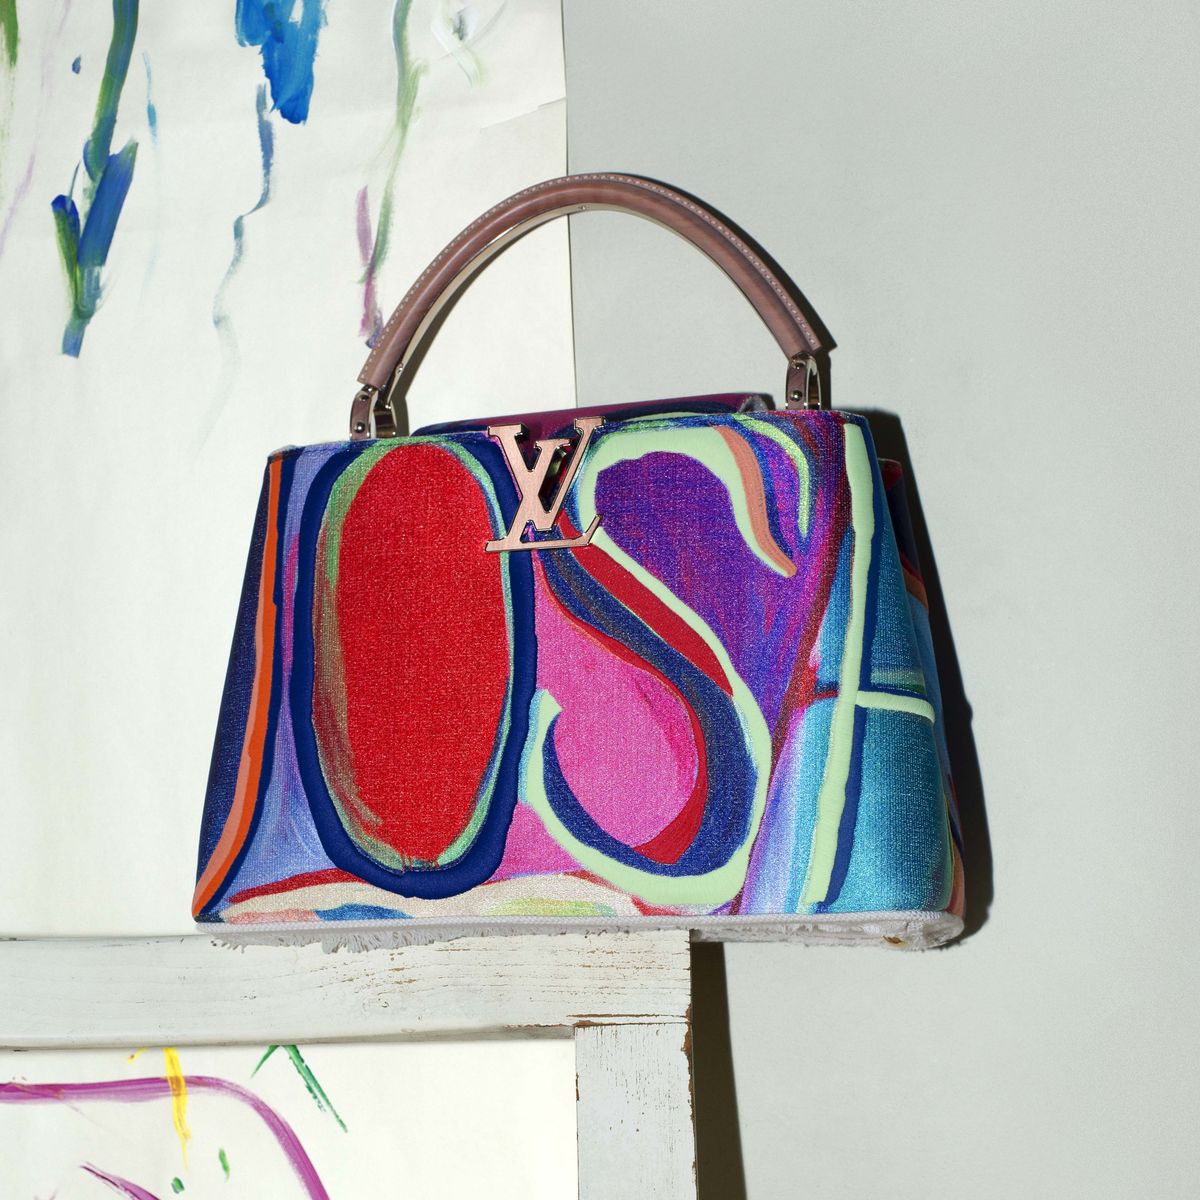 Louis Vuitton Taps Artists, Long a Source of Fashion Inspiration, for New  ArtyCapucines Bags